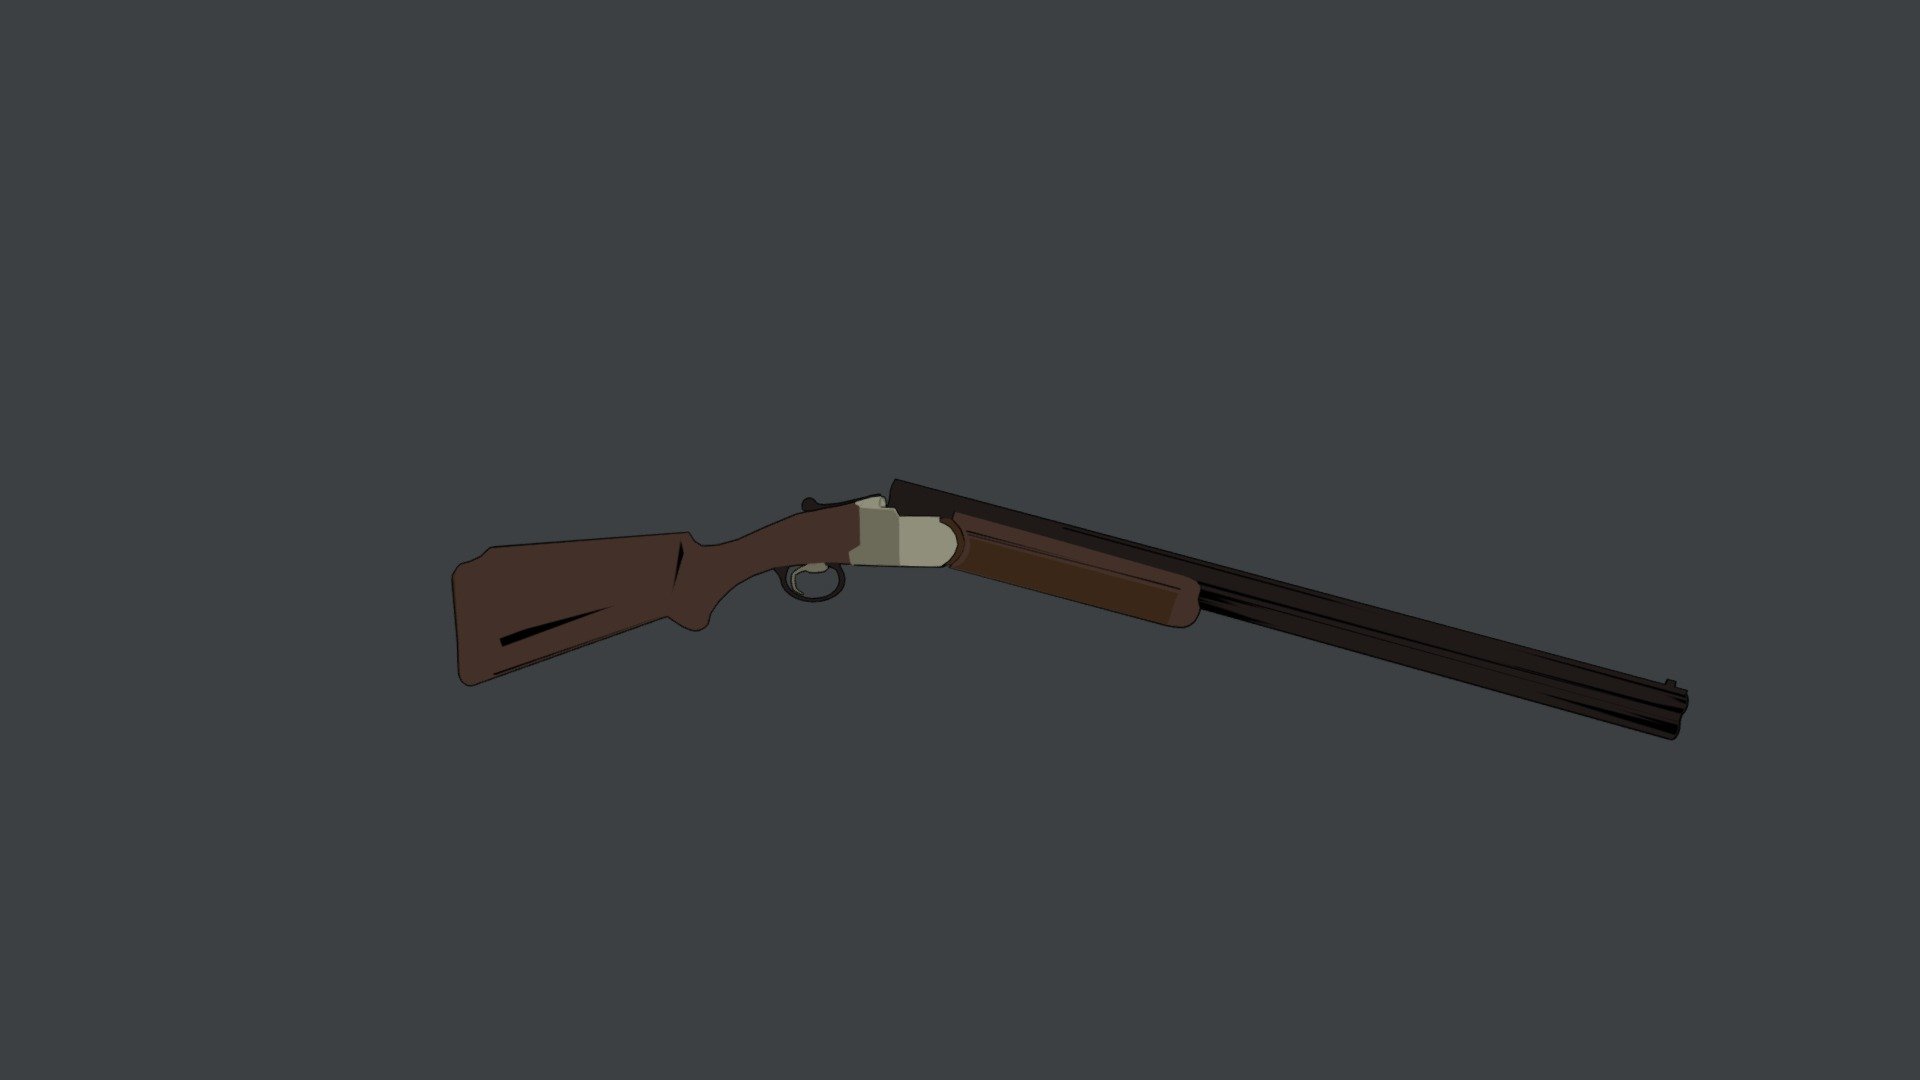 A Double Barrel Shotgun with cartoon material reference from skeet guns 3d model